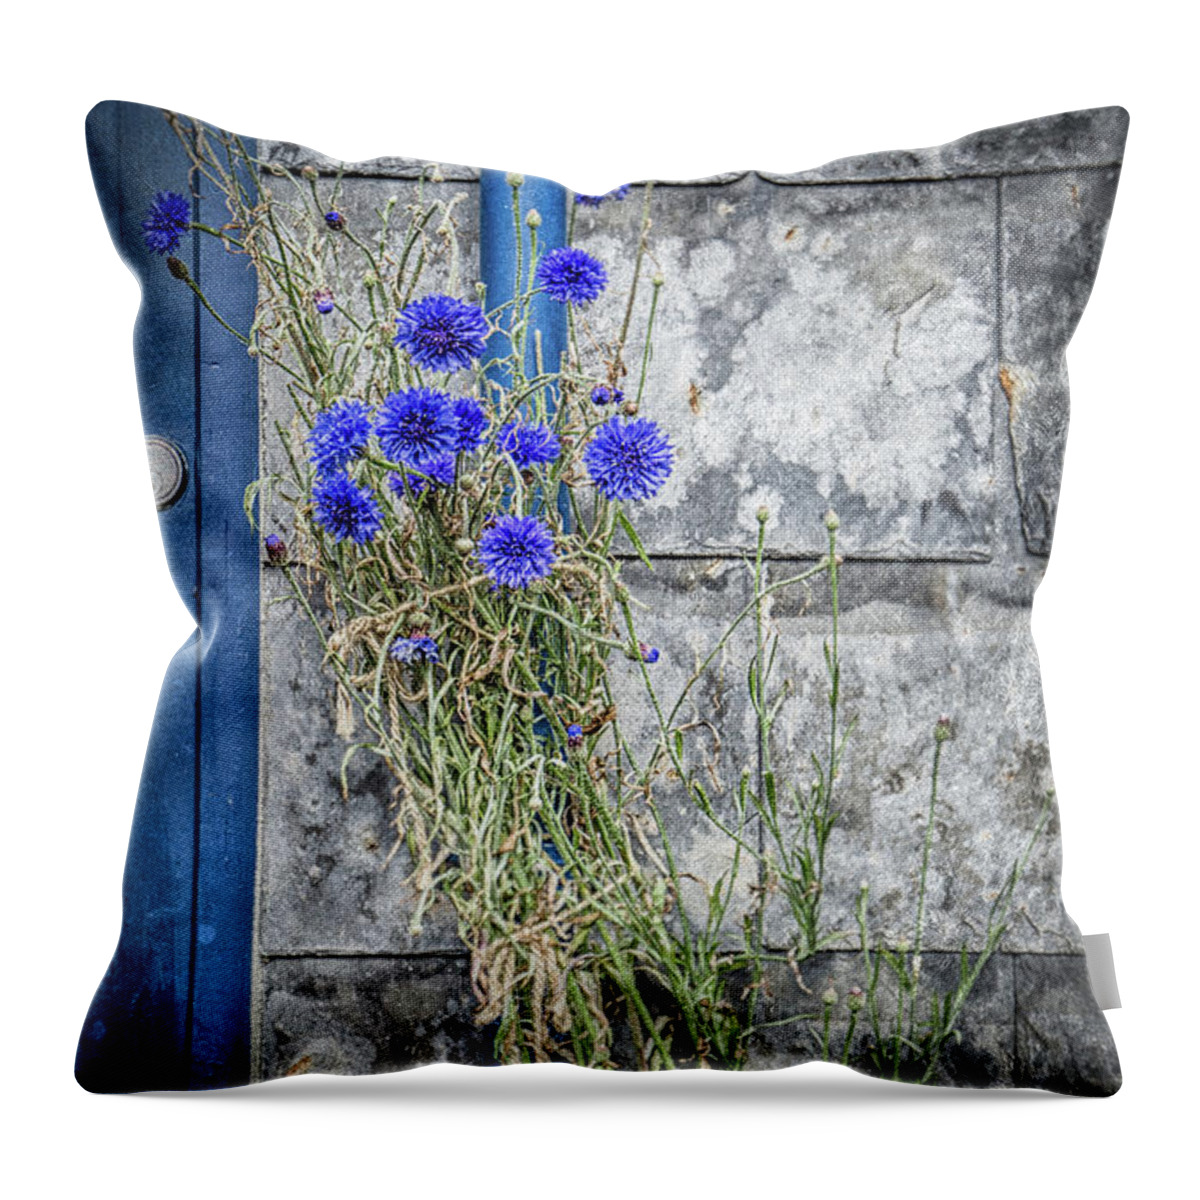 Cornflower Throw Pillow featuring the photograph Cornflowers by Nigel R Bell